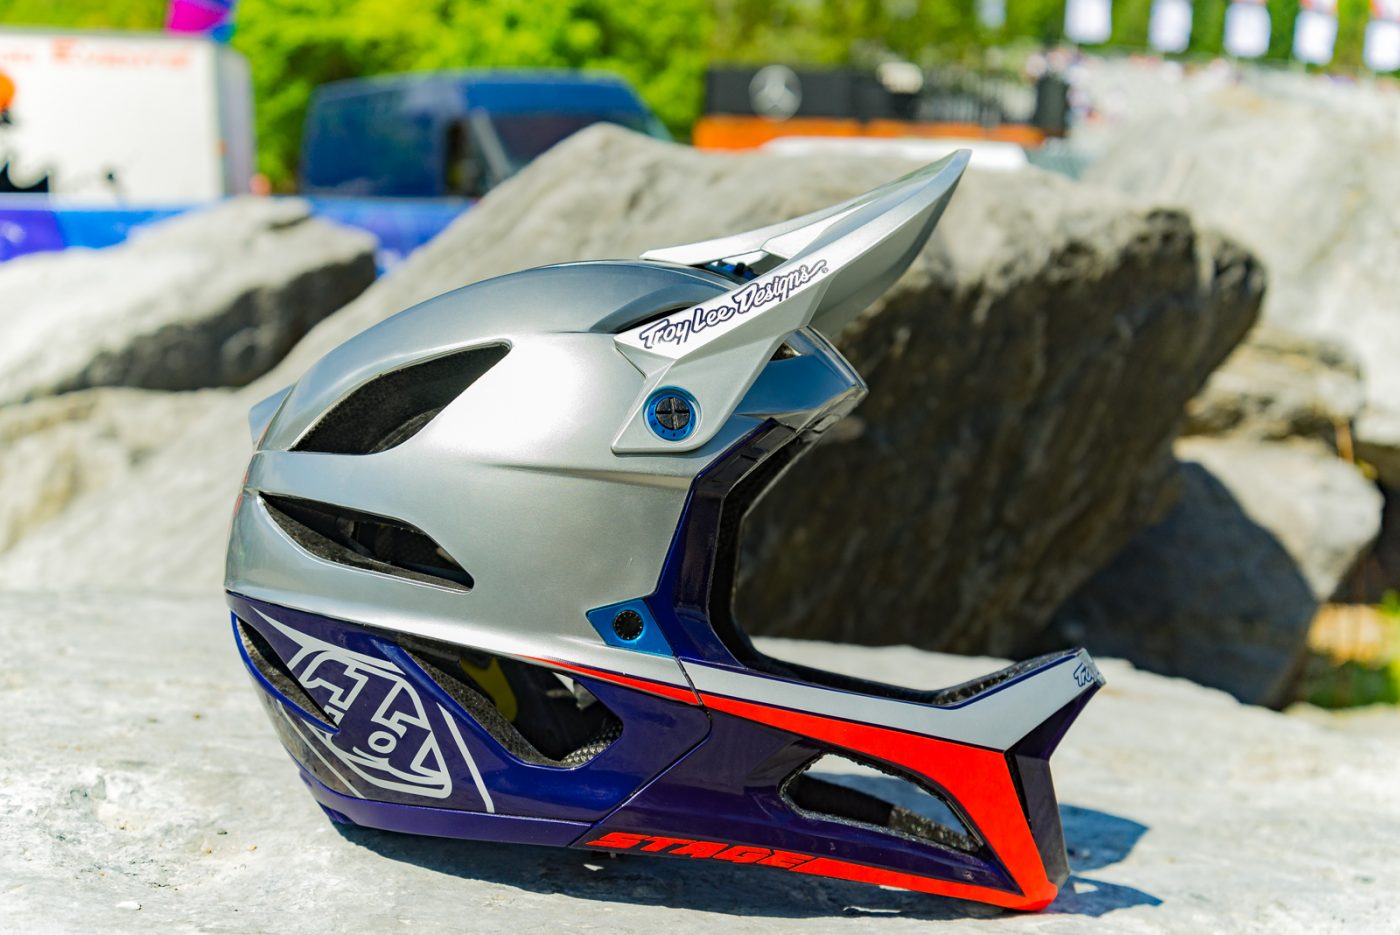 The Troy Lee Designs Stage helmet finally landed and looks awesome